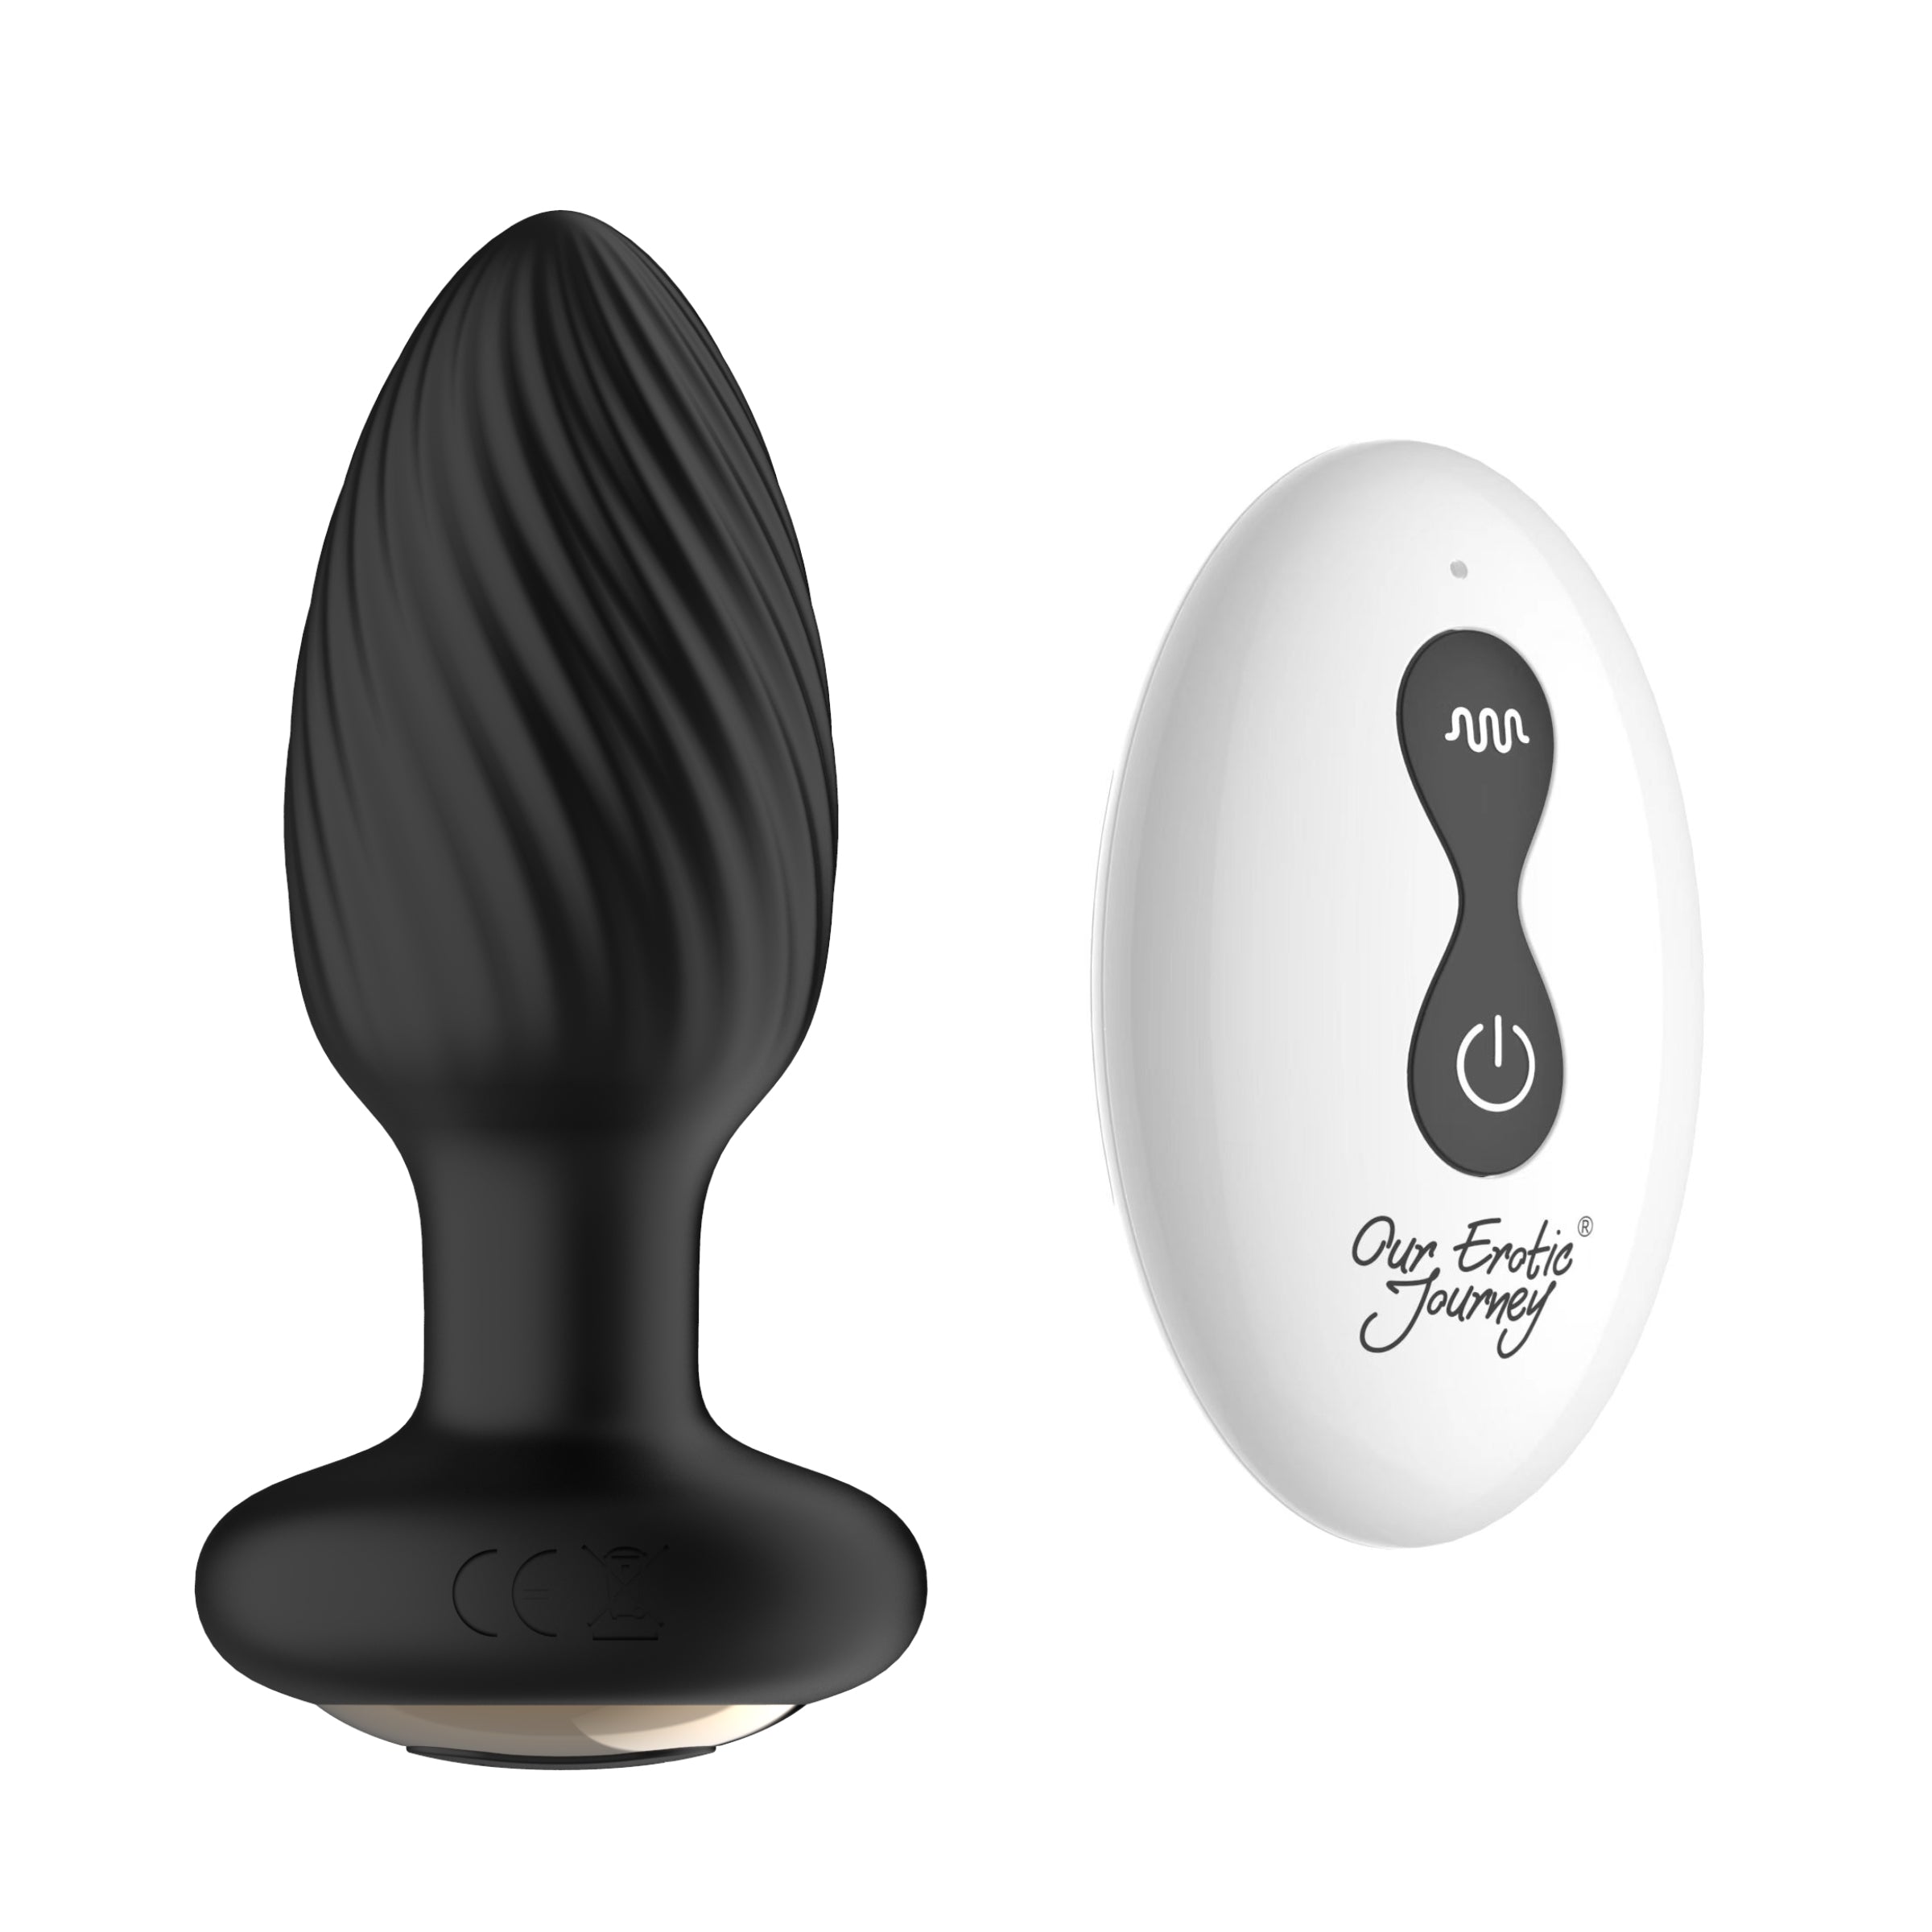 The Spin Rotating Anal Plug with Remote Control